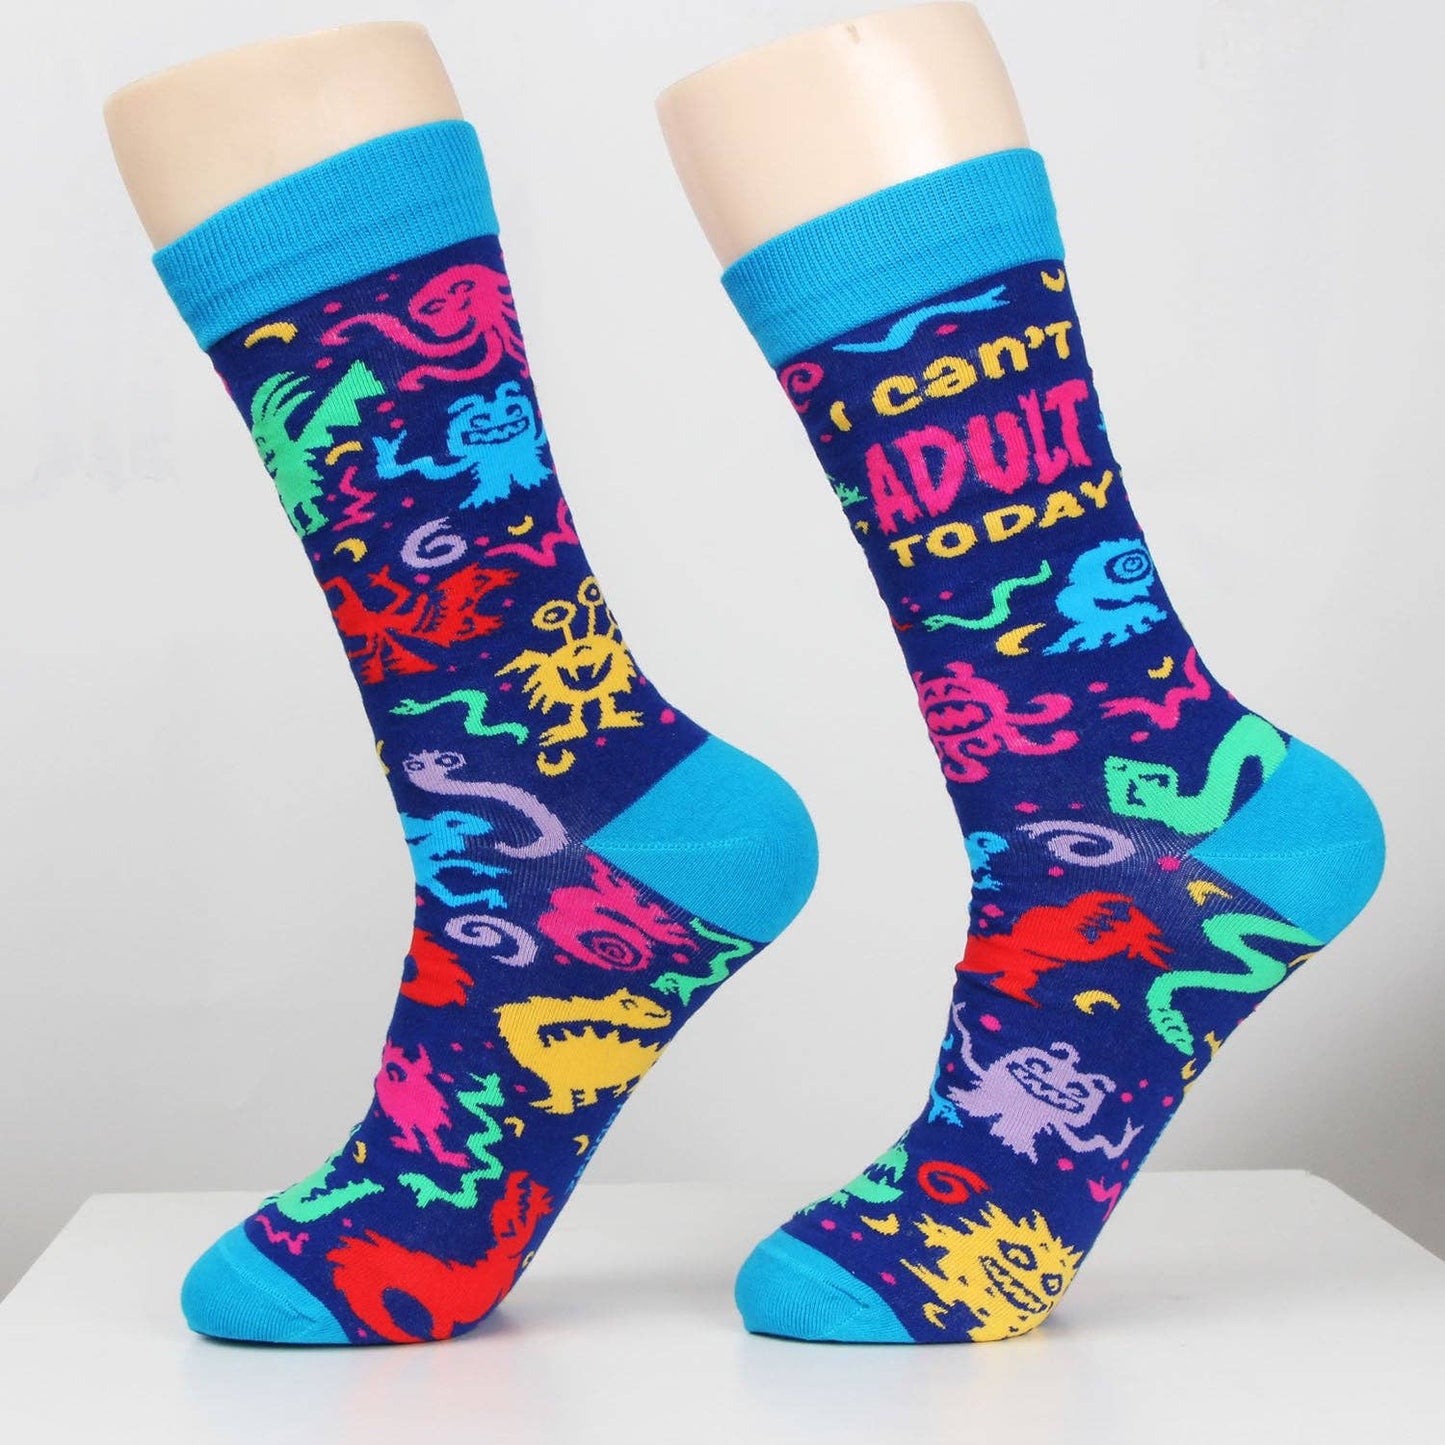 I Can’t Adult Today Men's Novelty Crew Socks